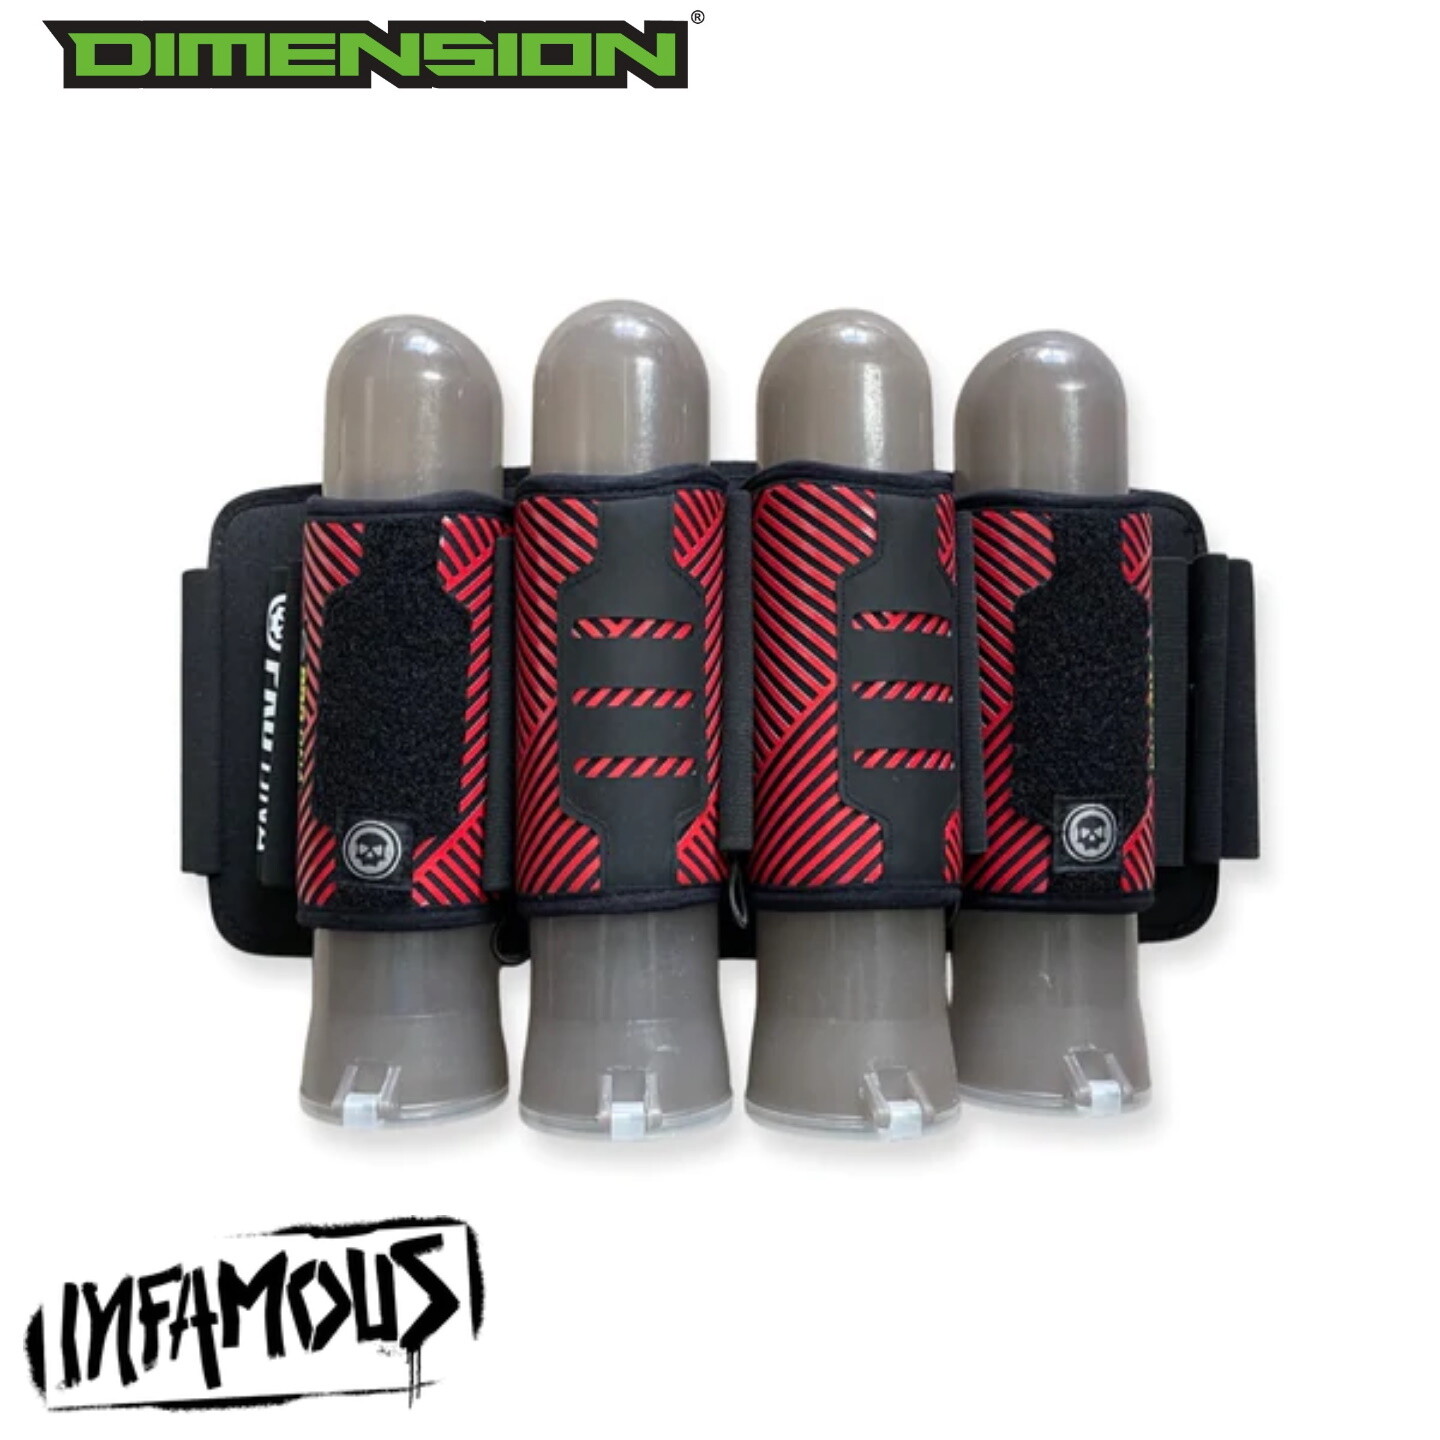 Infamous PRO DNA Reflex Harness - Red - 4+7